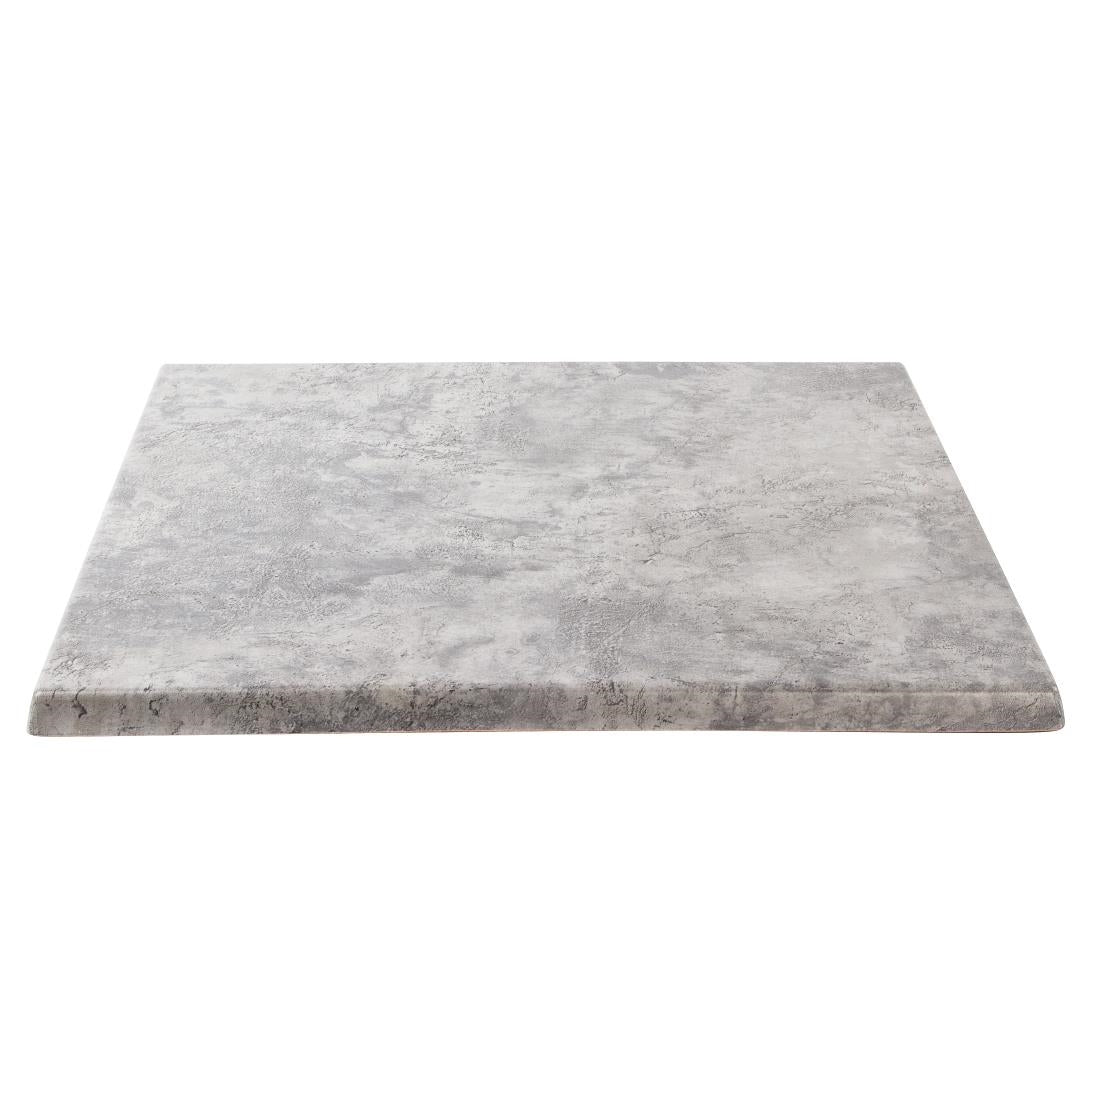 GM423 Werzalit Pre-drilled Square Table Top Concrete 700mm JD Catering Equipment Solutions Ltd